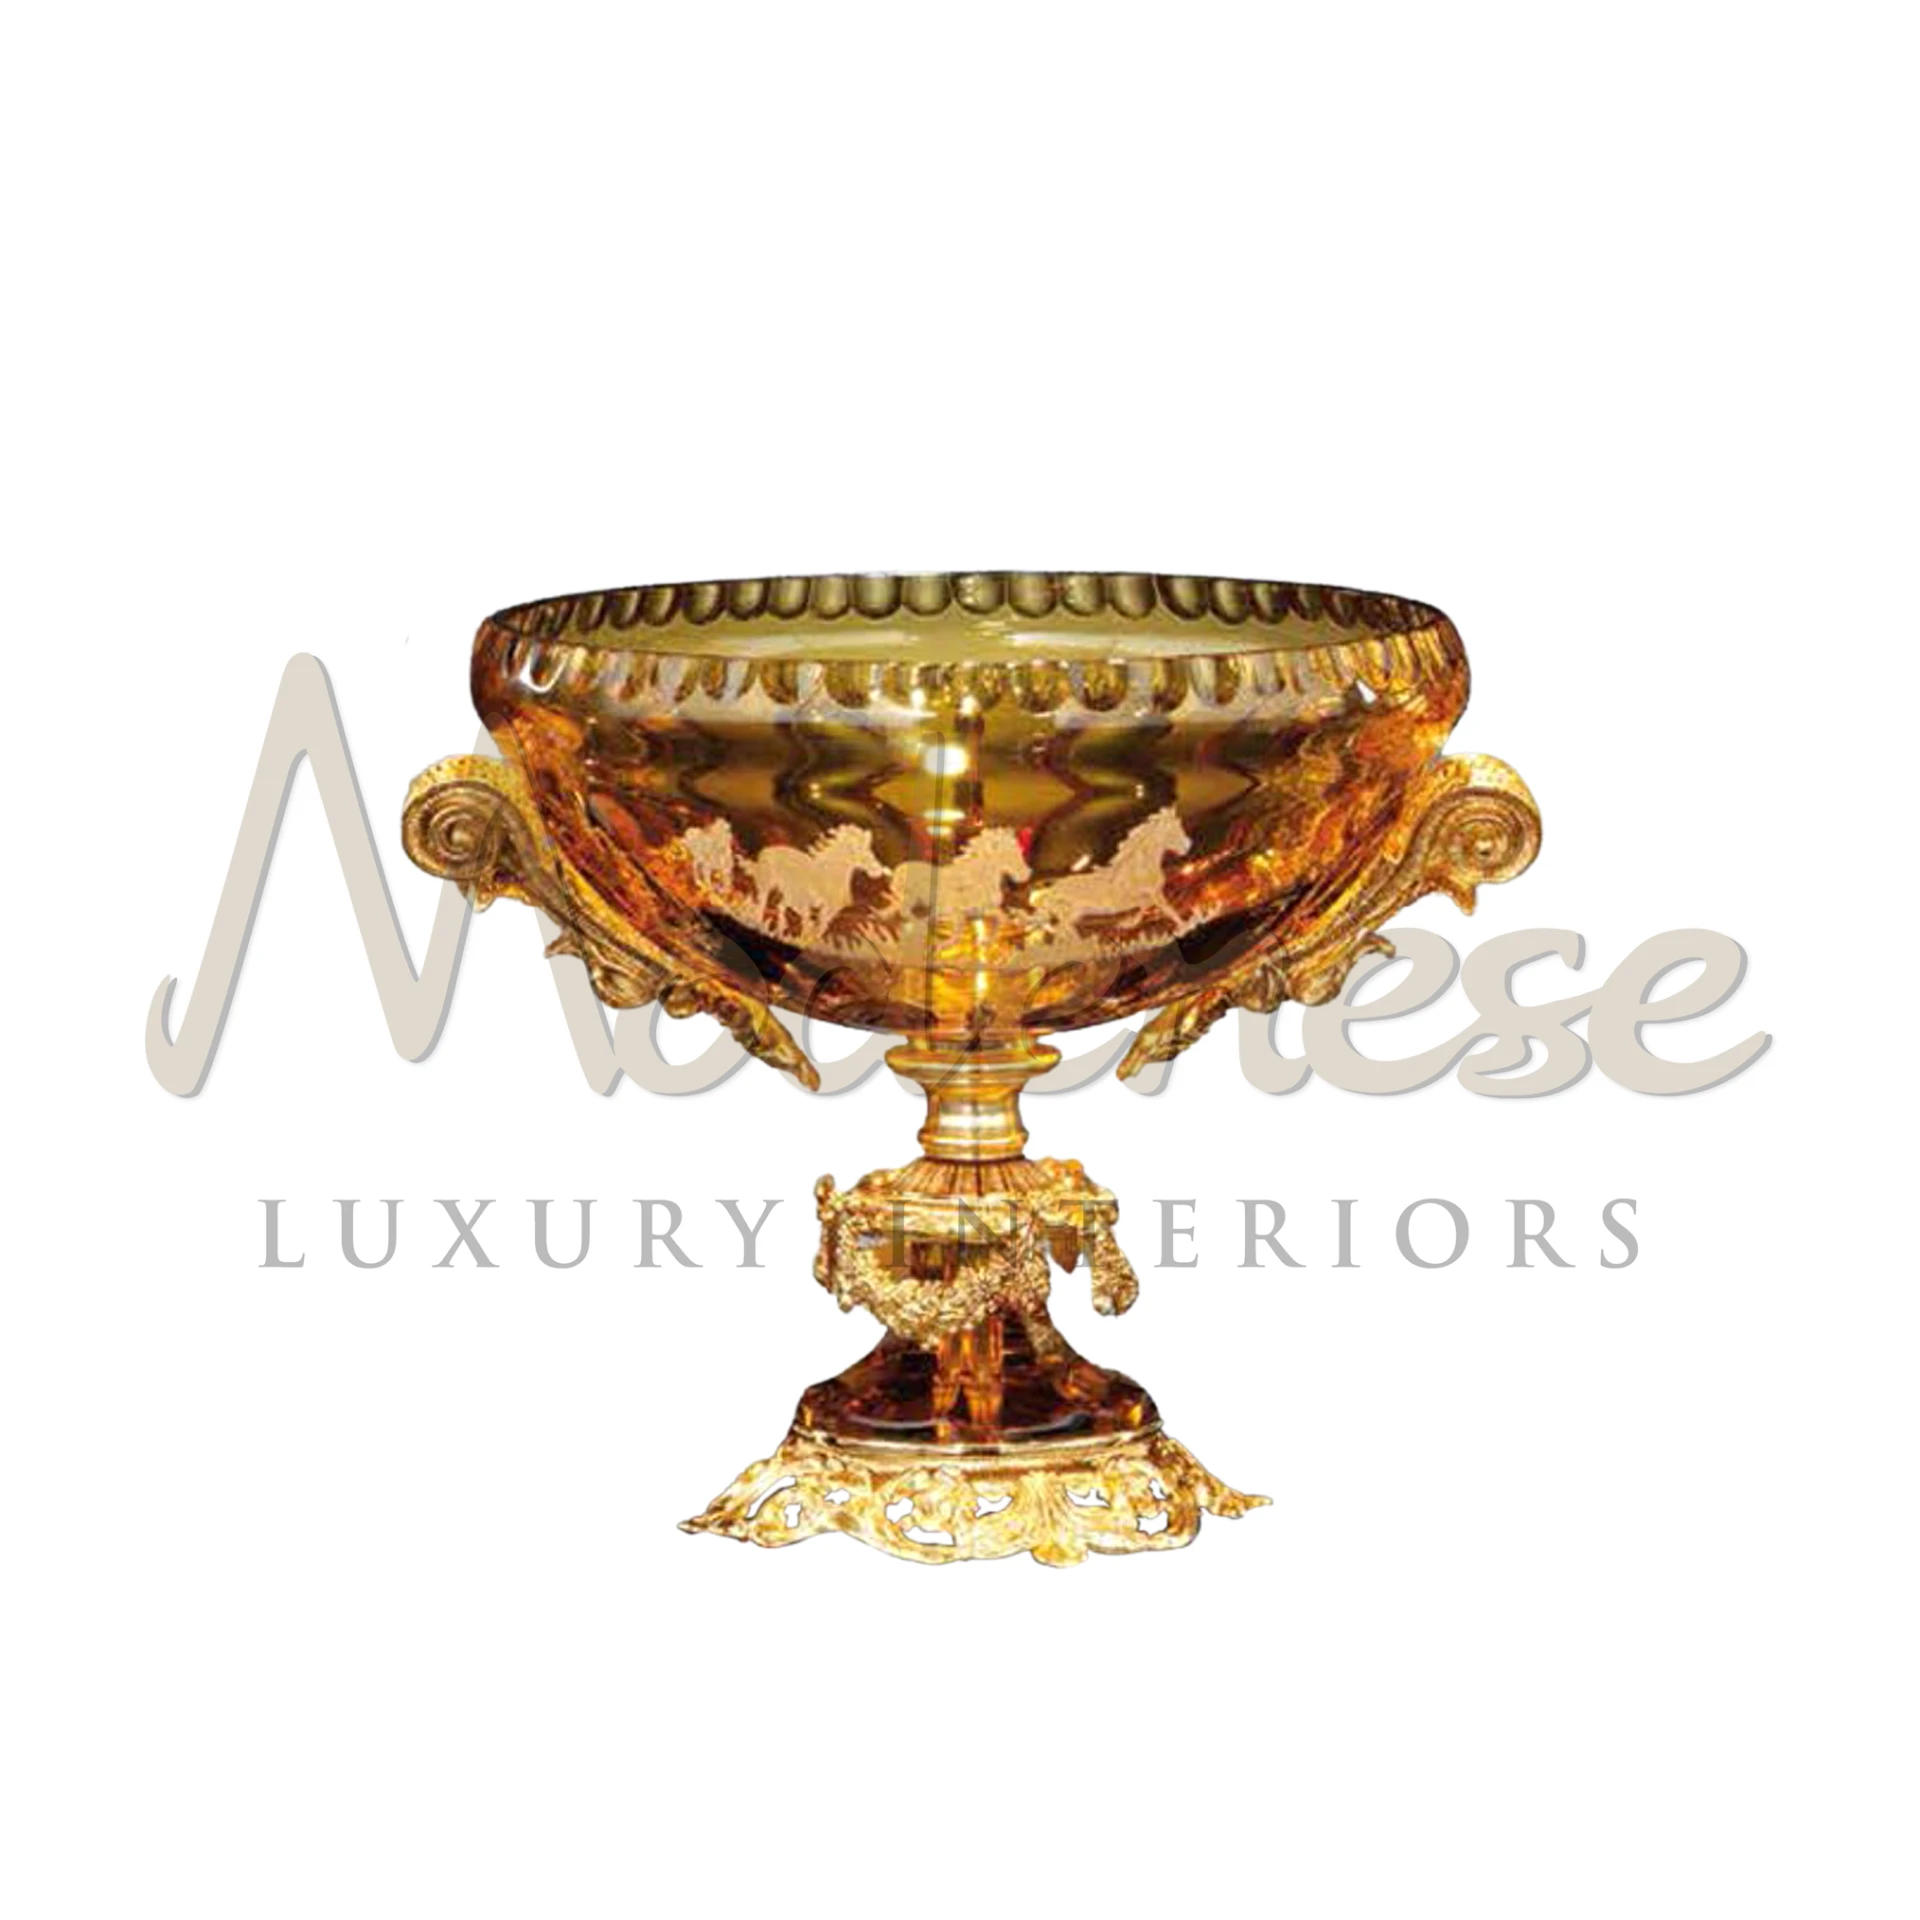 Classic Horses Bowl with elegant curves, enhancing luxury interiors with its intricate patterns and ornamental motifs.